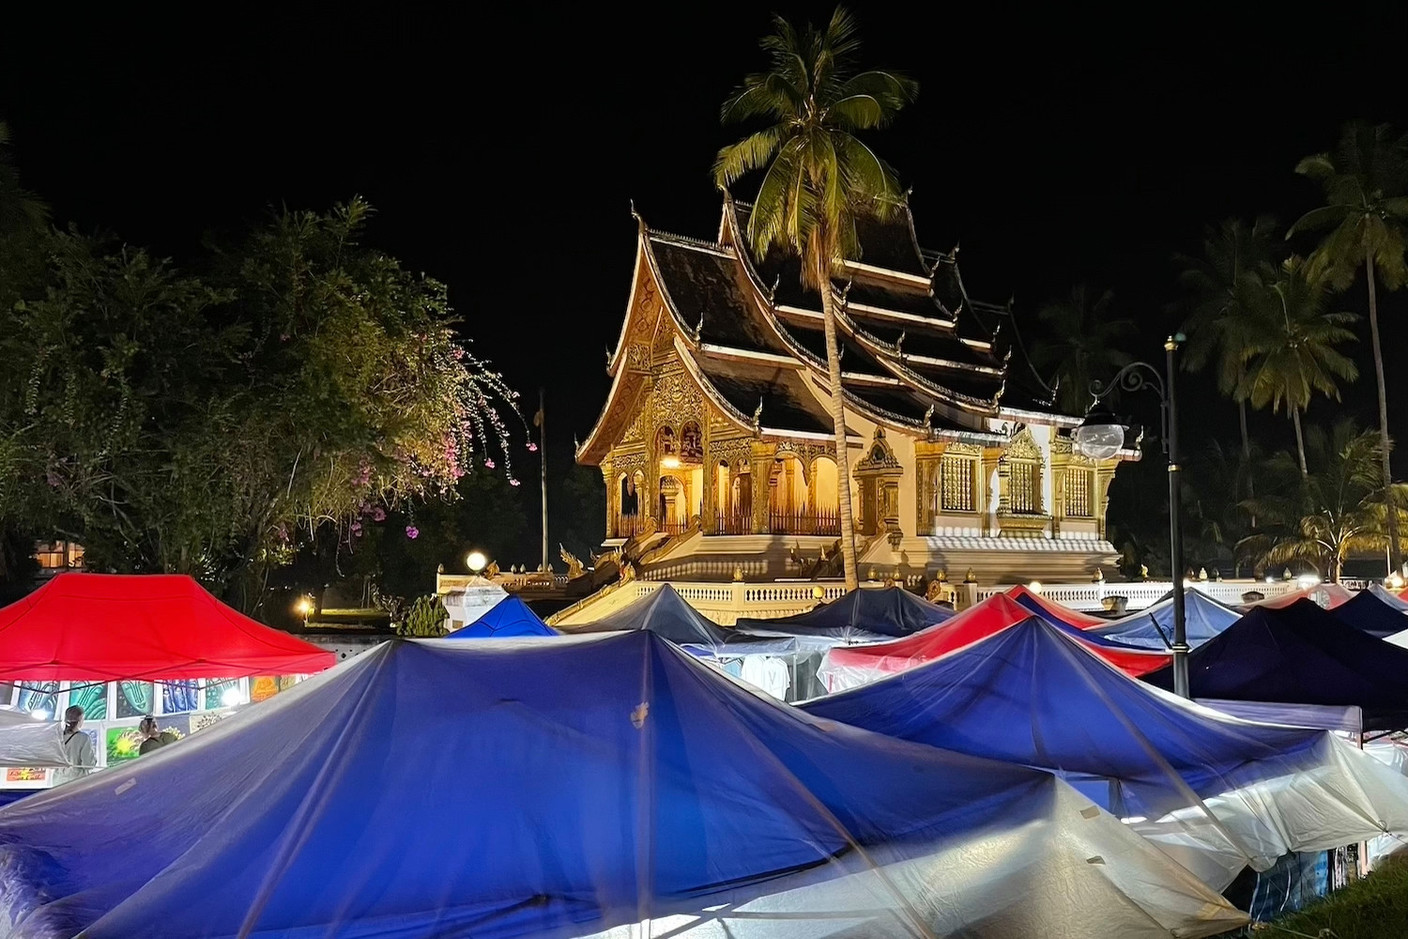 Haw Pha Bang temple in the grounds of the former royal palace in Luang Prabang with tents from the daily night market. Photos: Cordula Schnuer